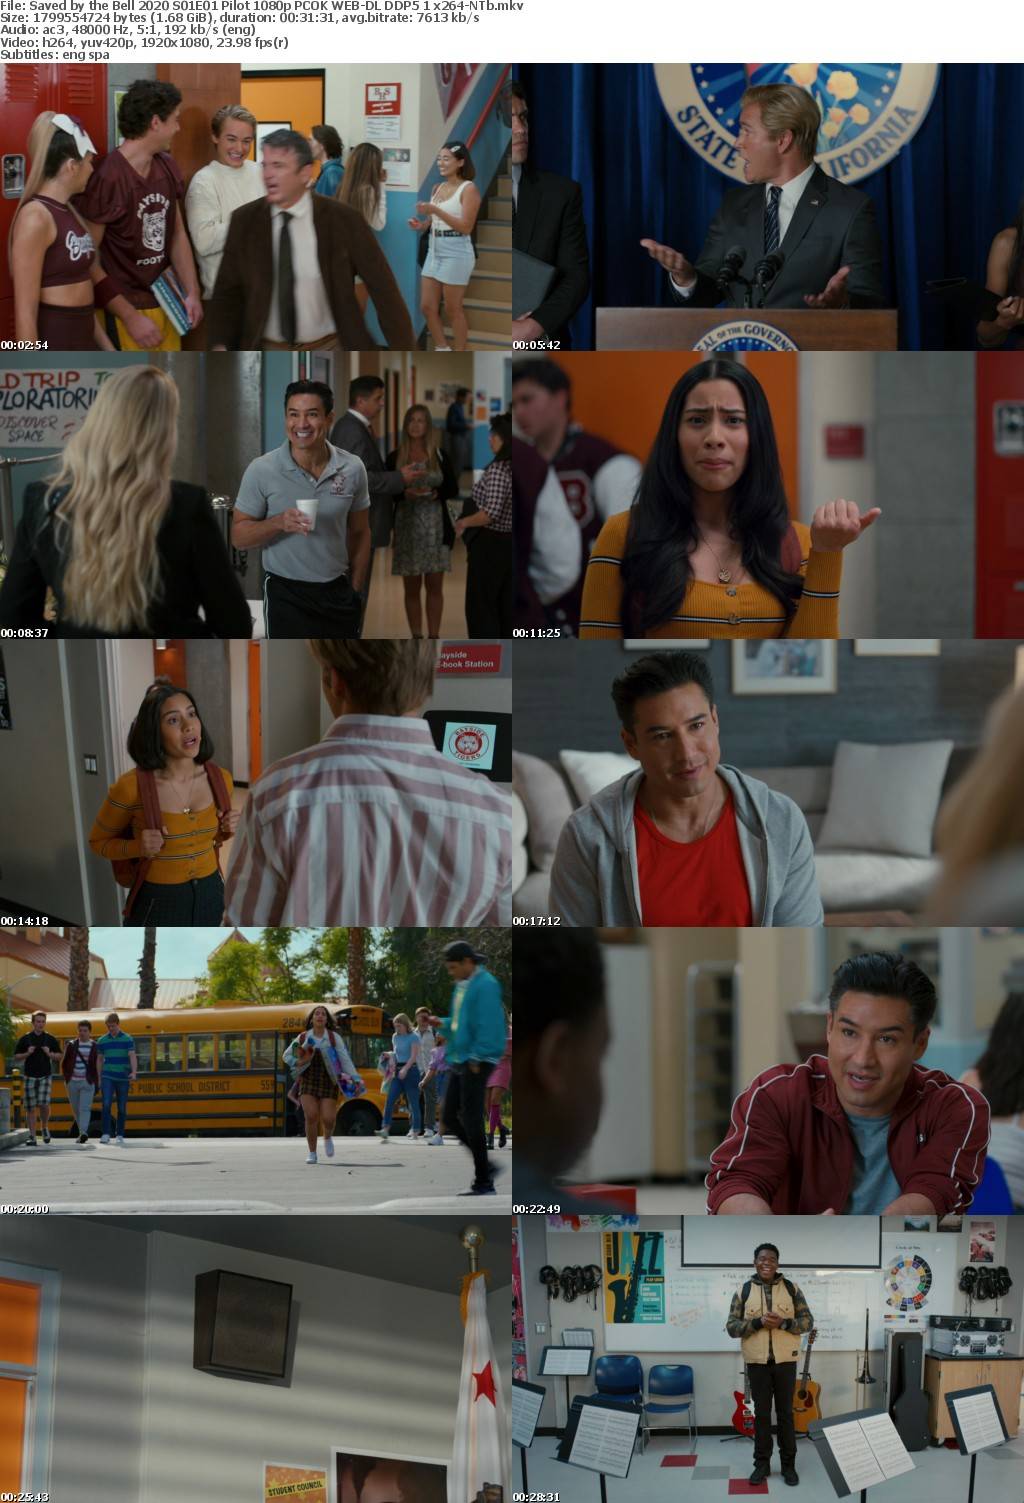 Saved by the Bell 2020 S01E01 Pilot 1080p PCOK WEB-DL DDP5 1 x264-NTb